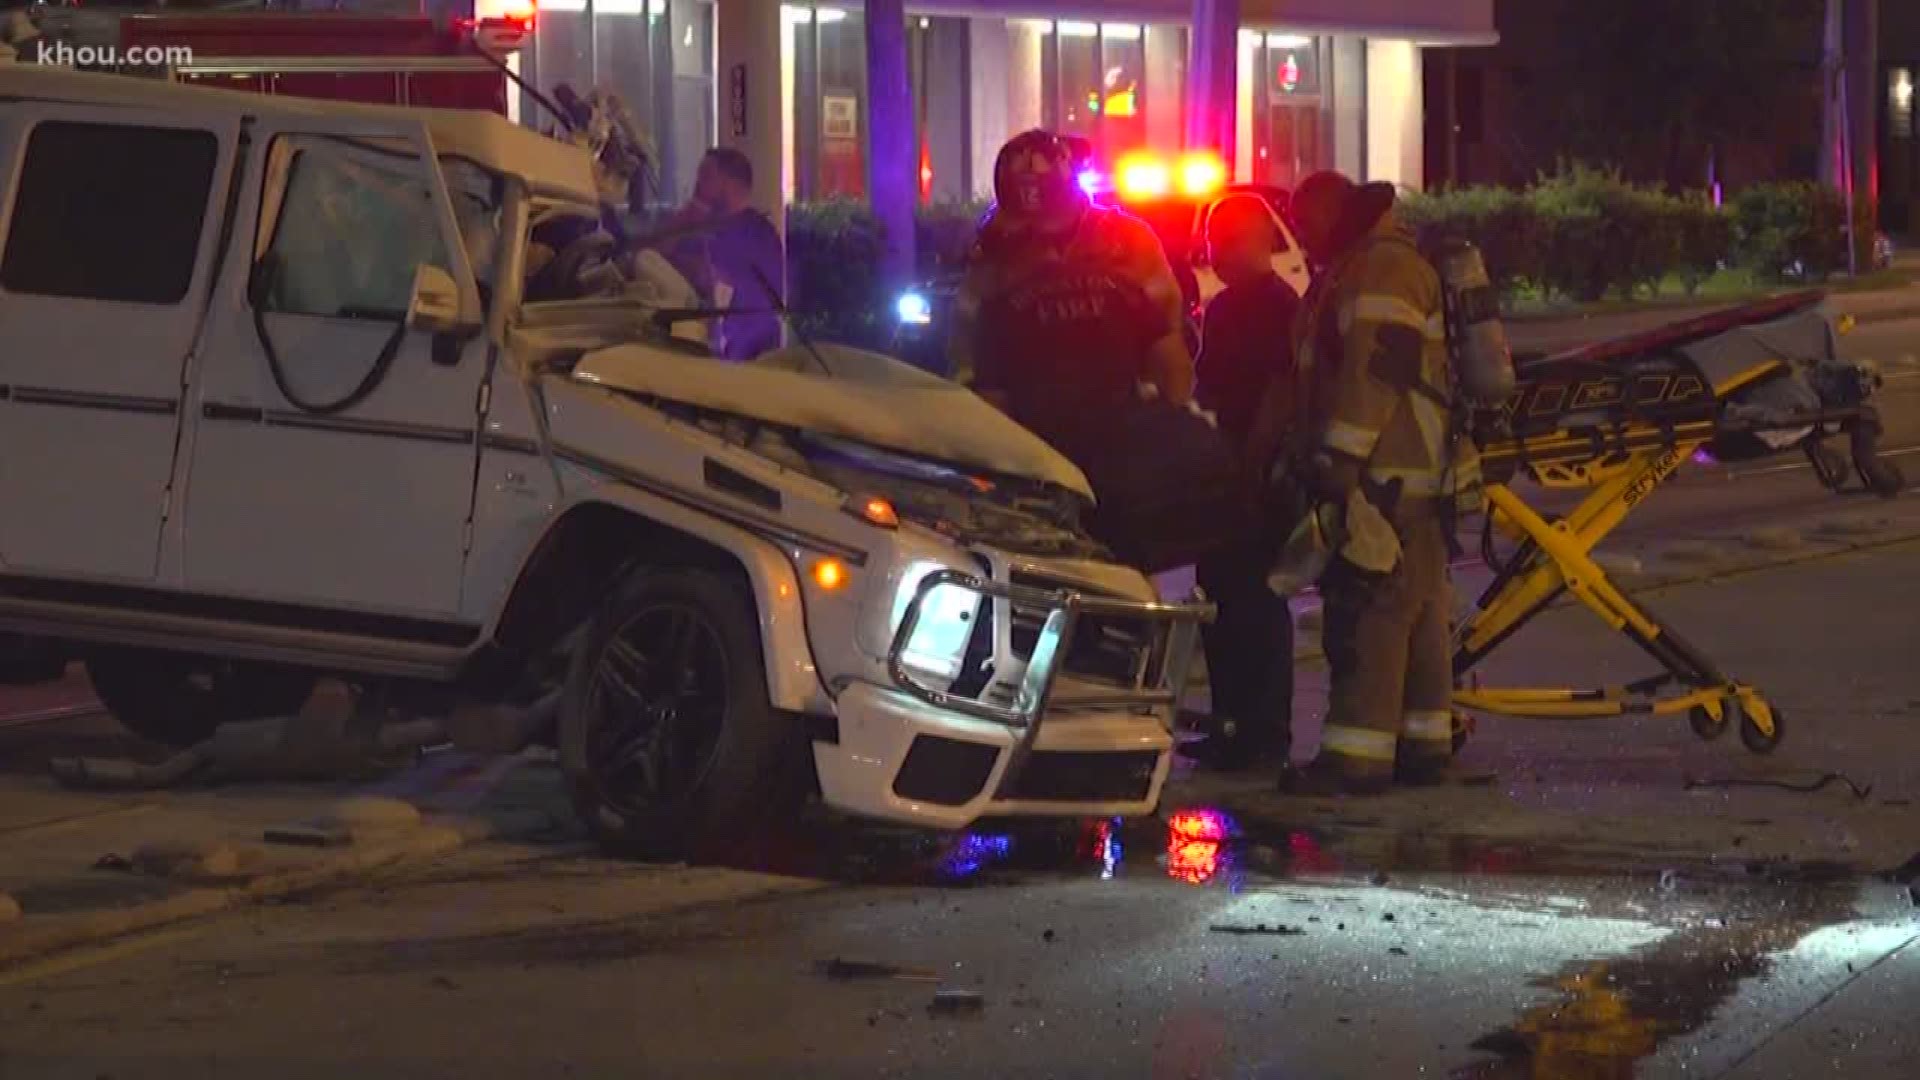 A fiery crash killed one woman in north Houston overnight.